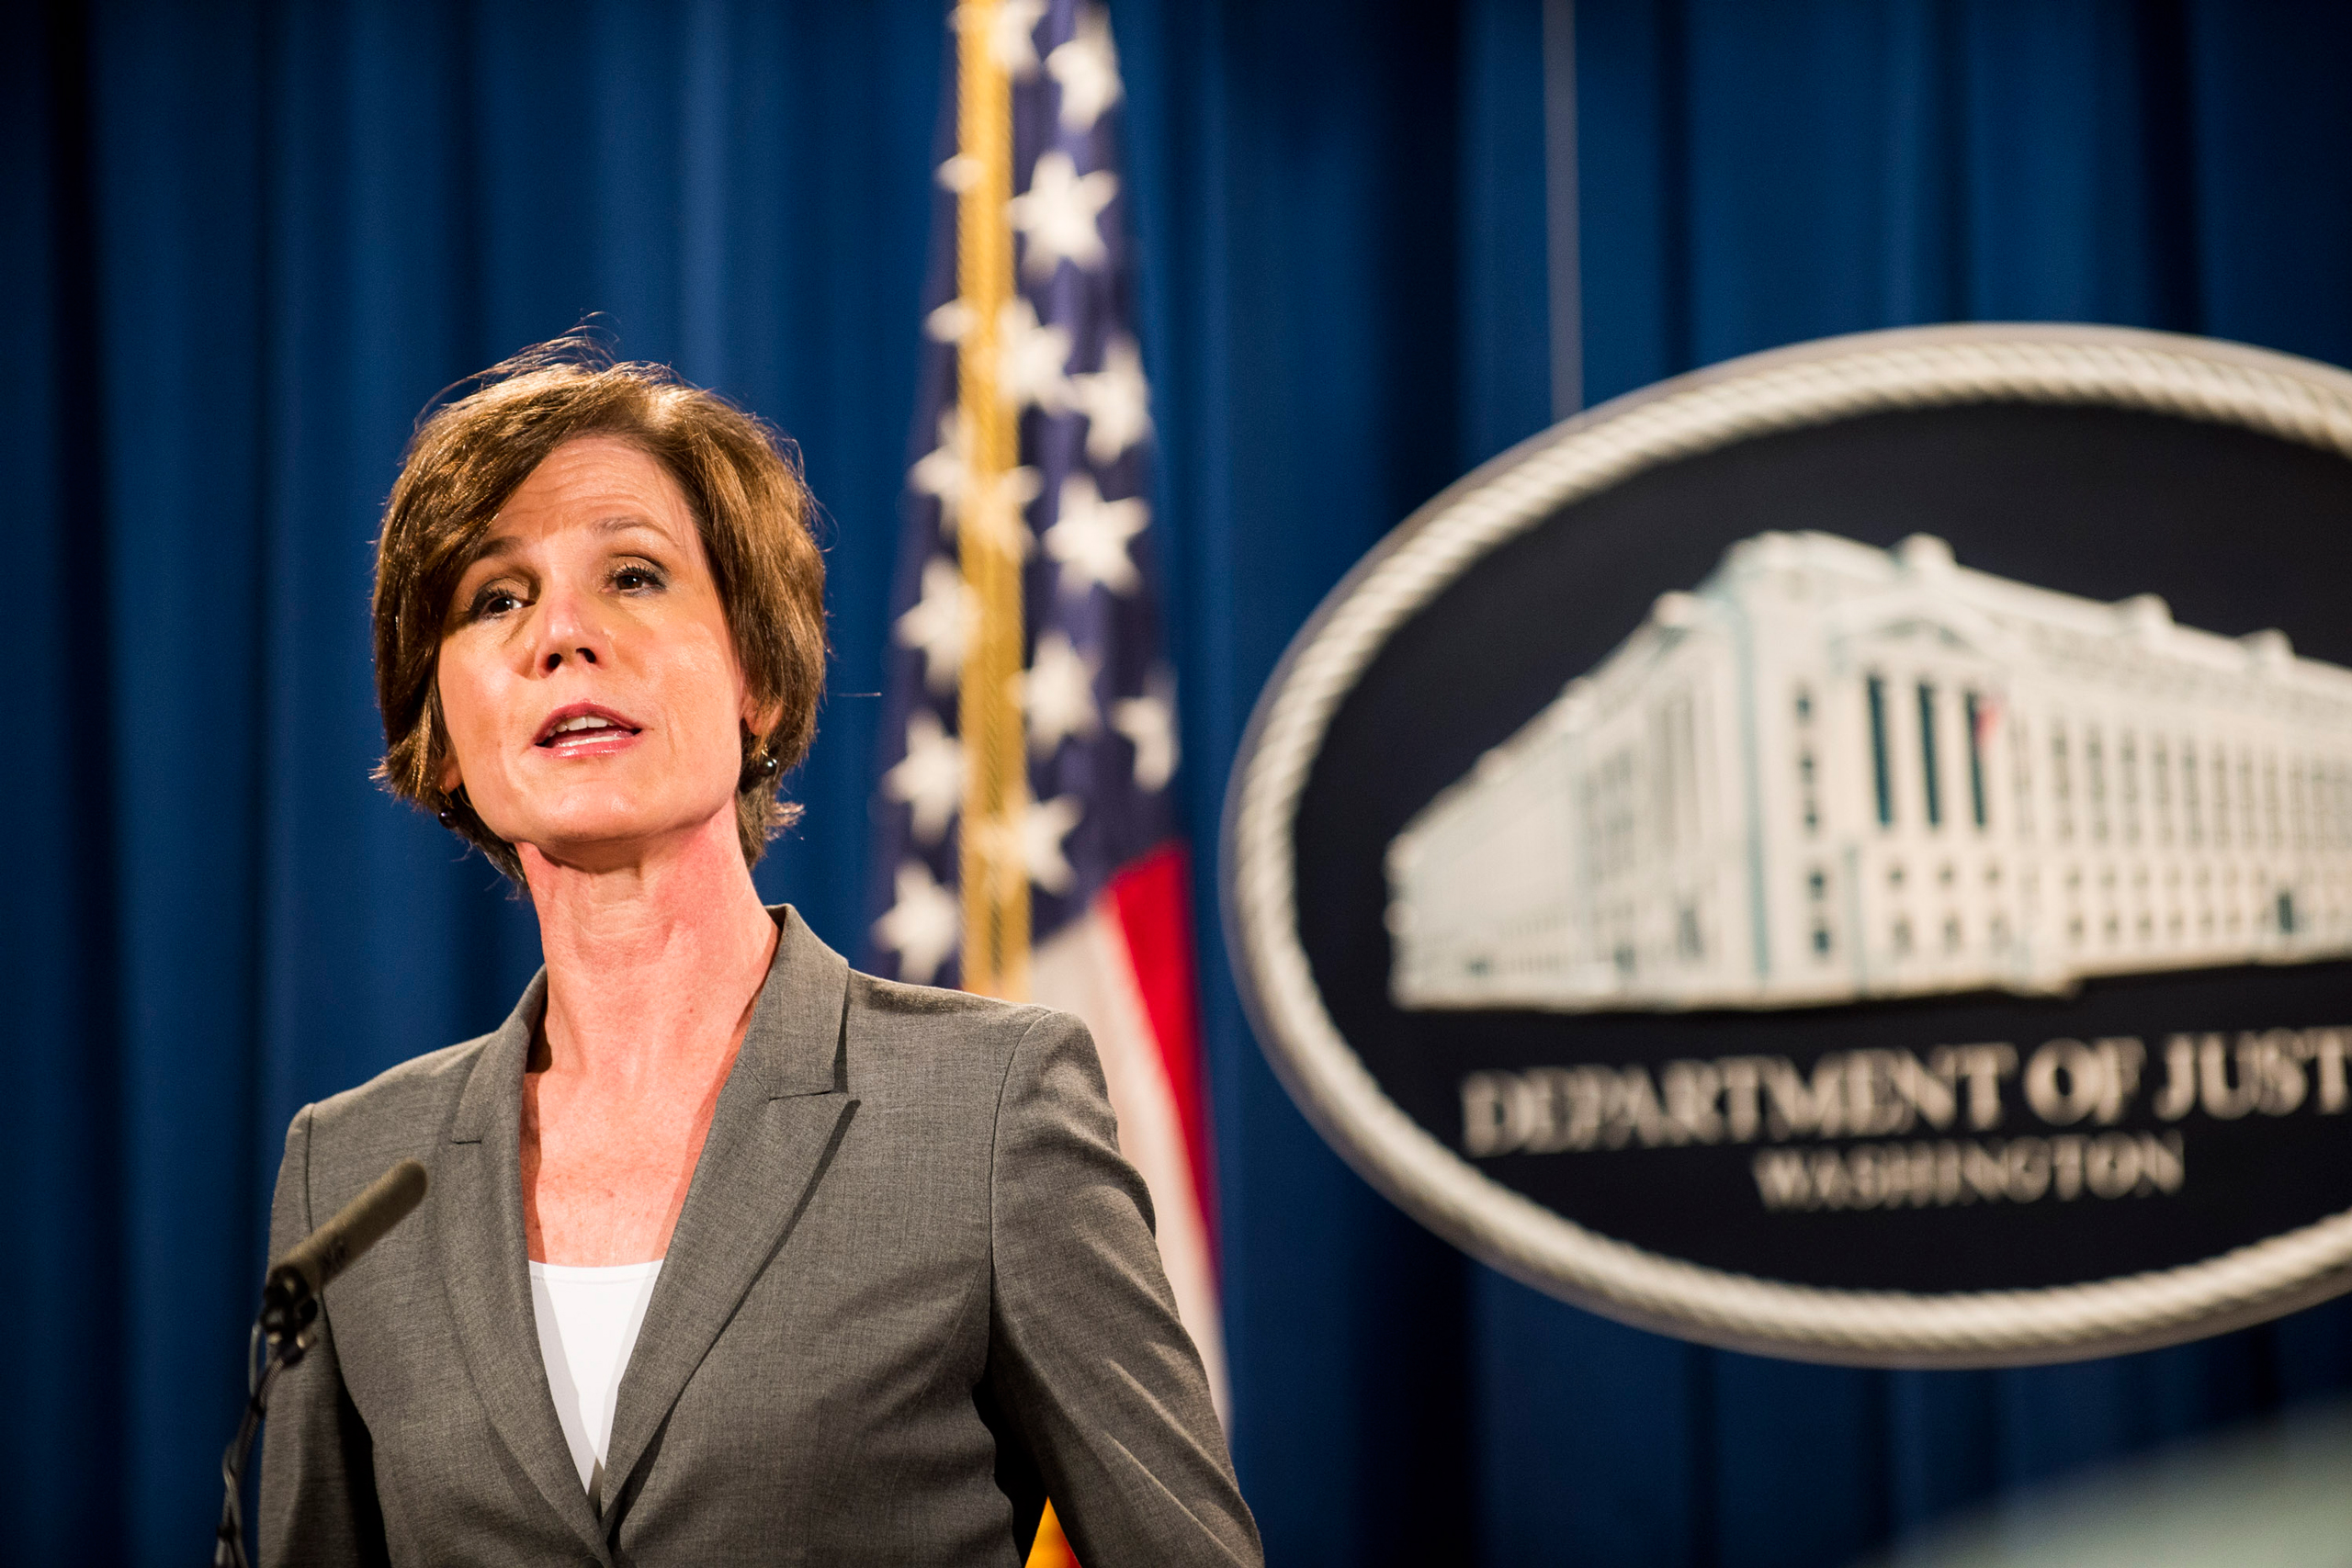 Deputy Attorney General Sally Q. Yates speaks during a press conference at the Department of Justice in Washington on June 28, 2016. (Pete Marovich—Getty Images)